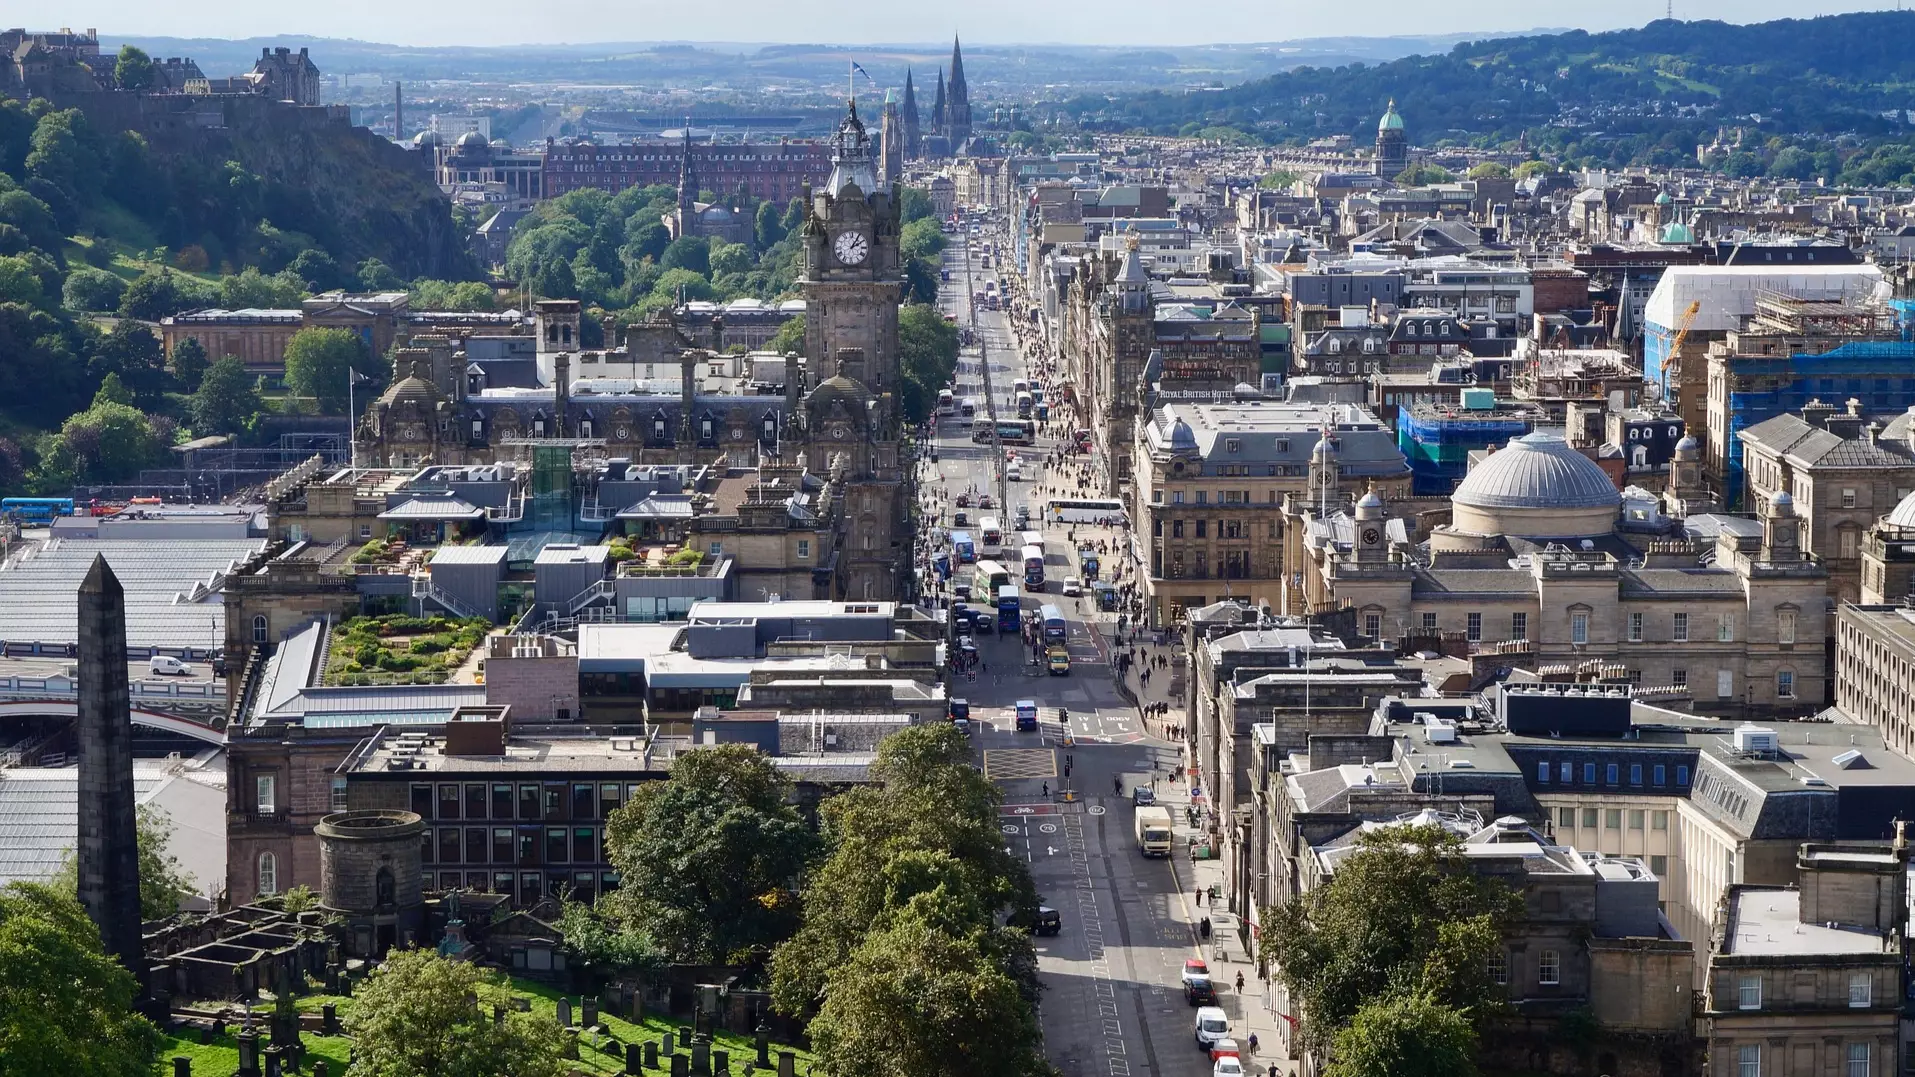 ​This UK City Has Been Named The 'Most Liveable' Place In The World